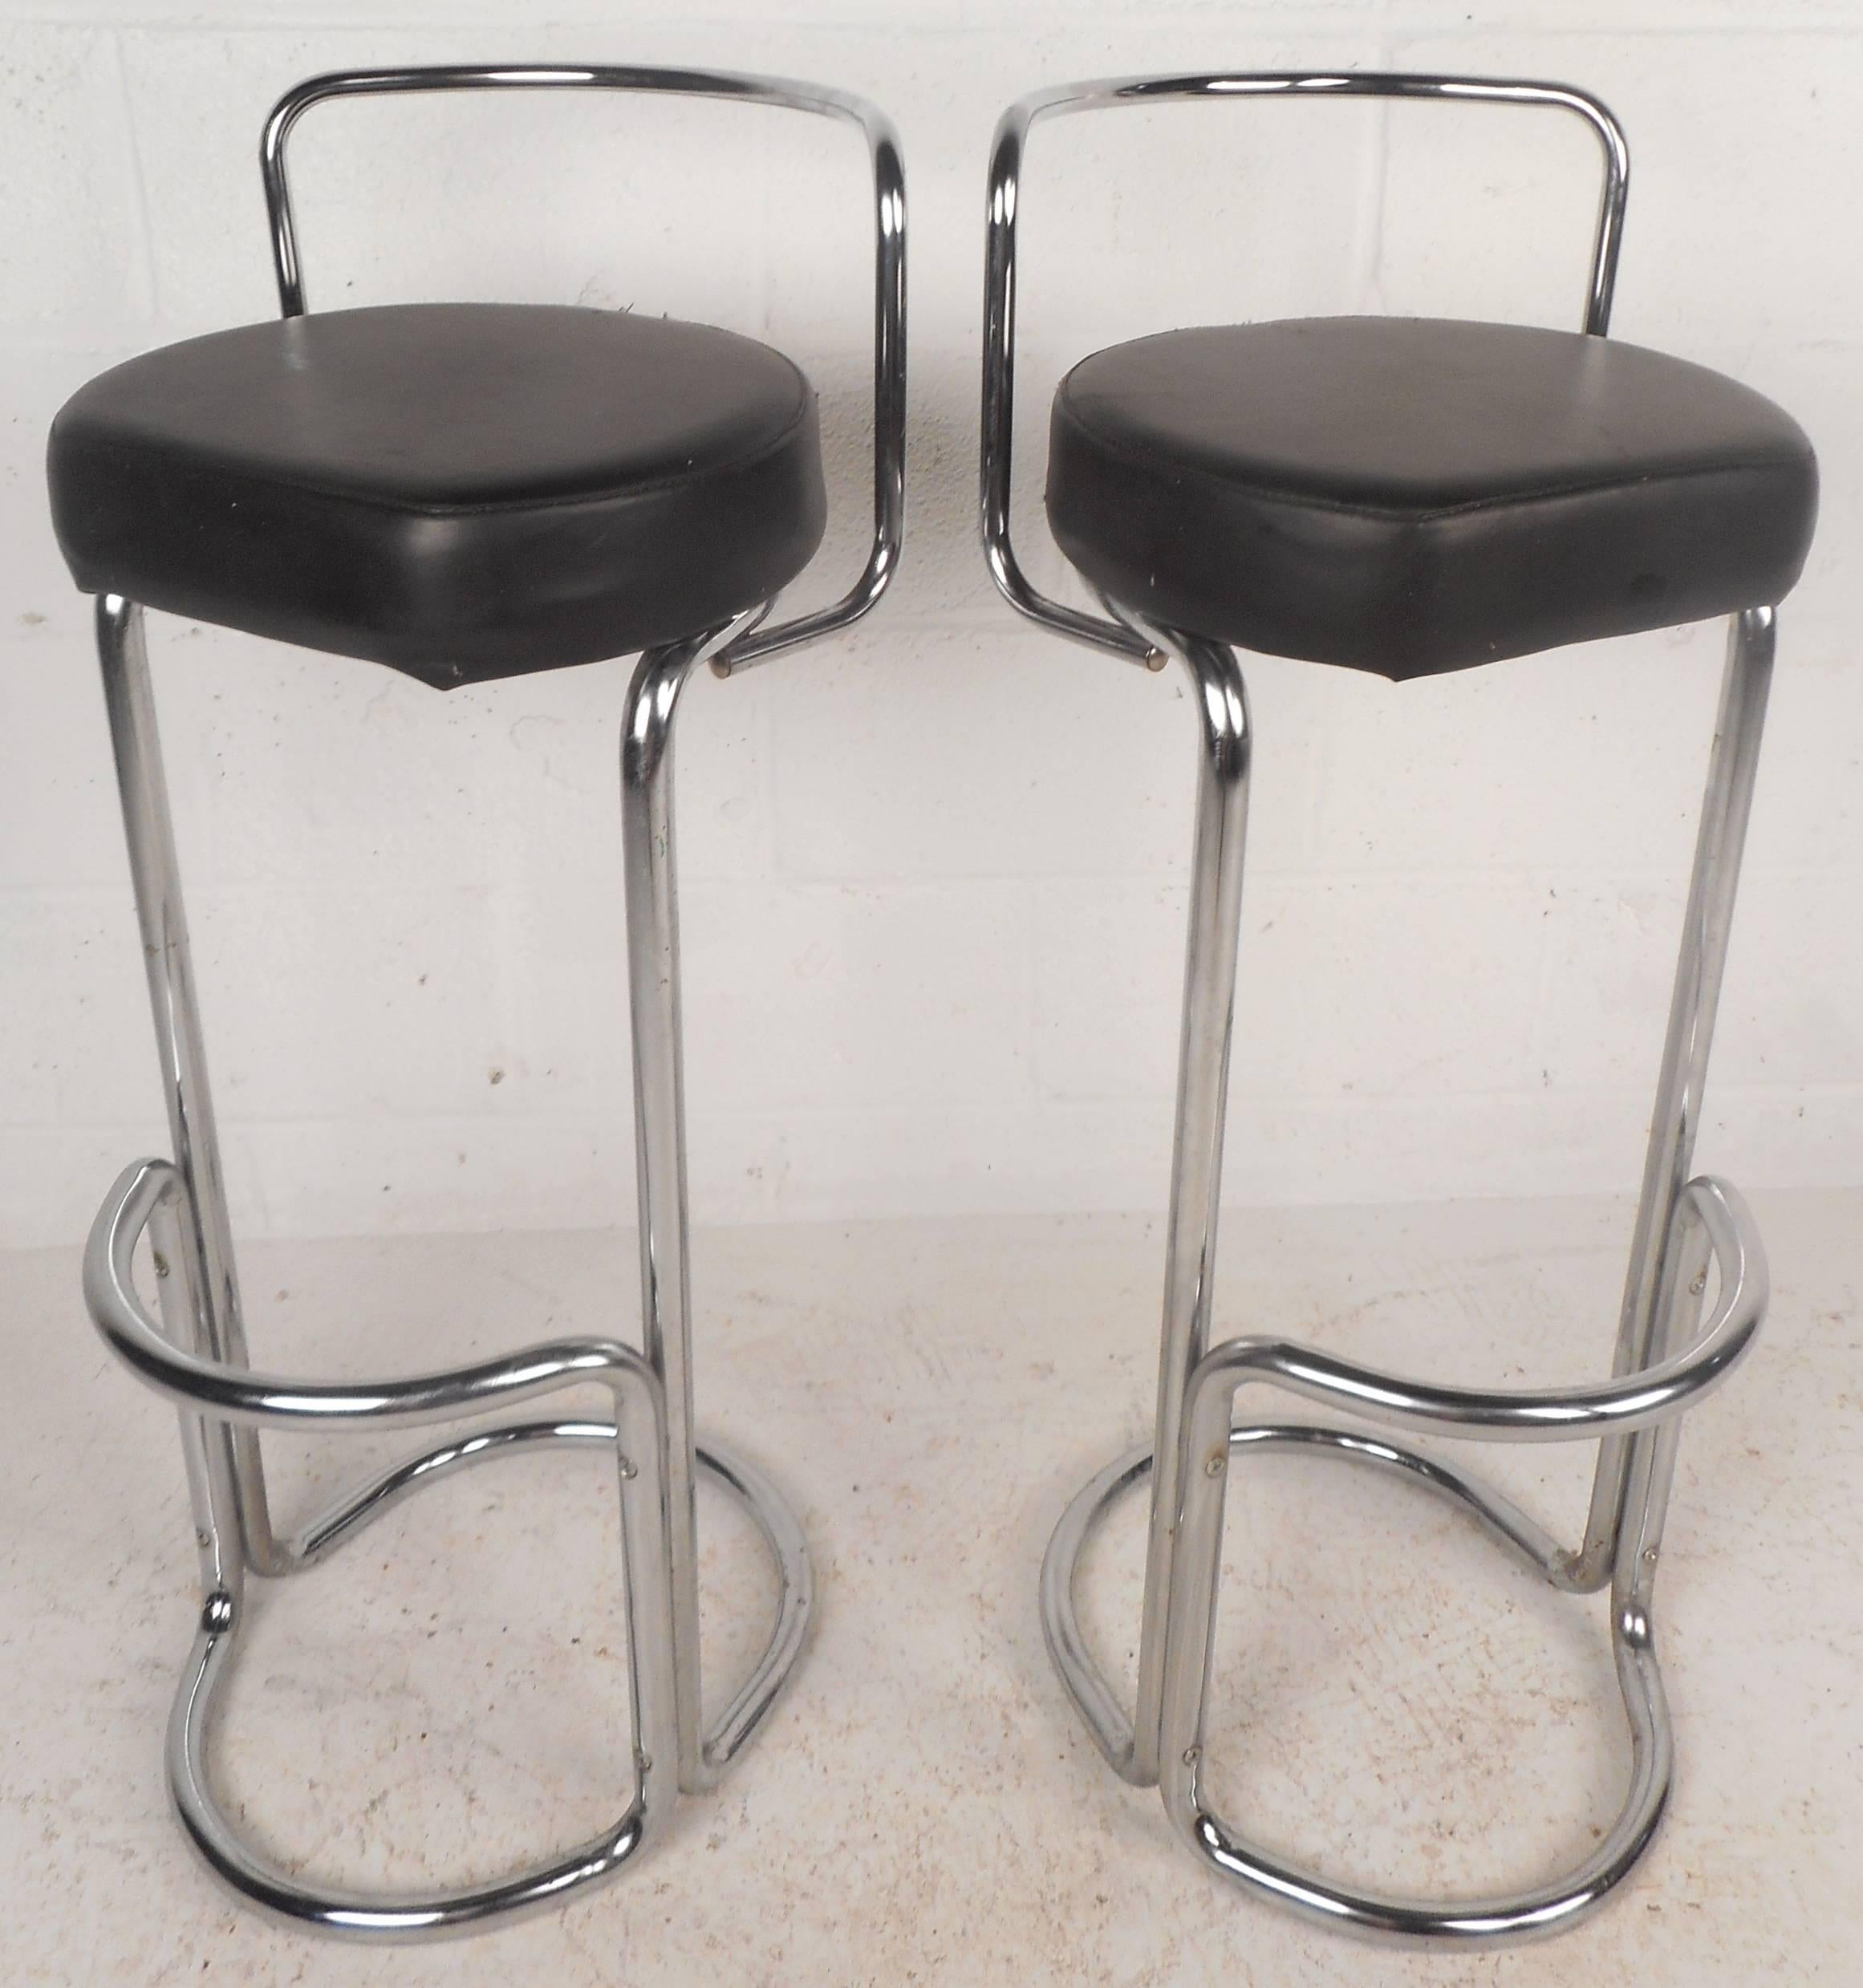 This stunning pair of vintage modern bar stools feature unique sculpted chrome frames with a vinyl seat. Sleek design with a rounded chrome backrest, kick rest, and a sturdy oval base. The stylish bent rod tubular frame ensures comfort and style in